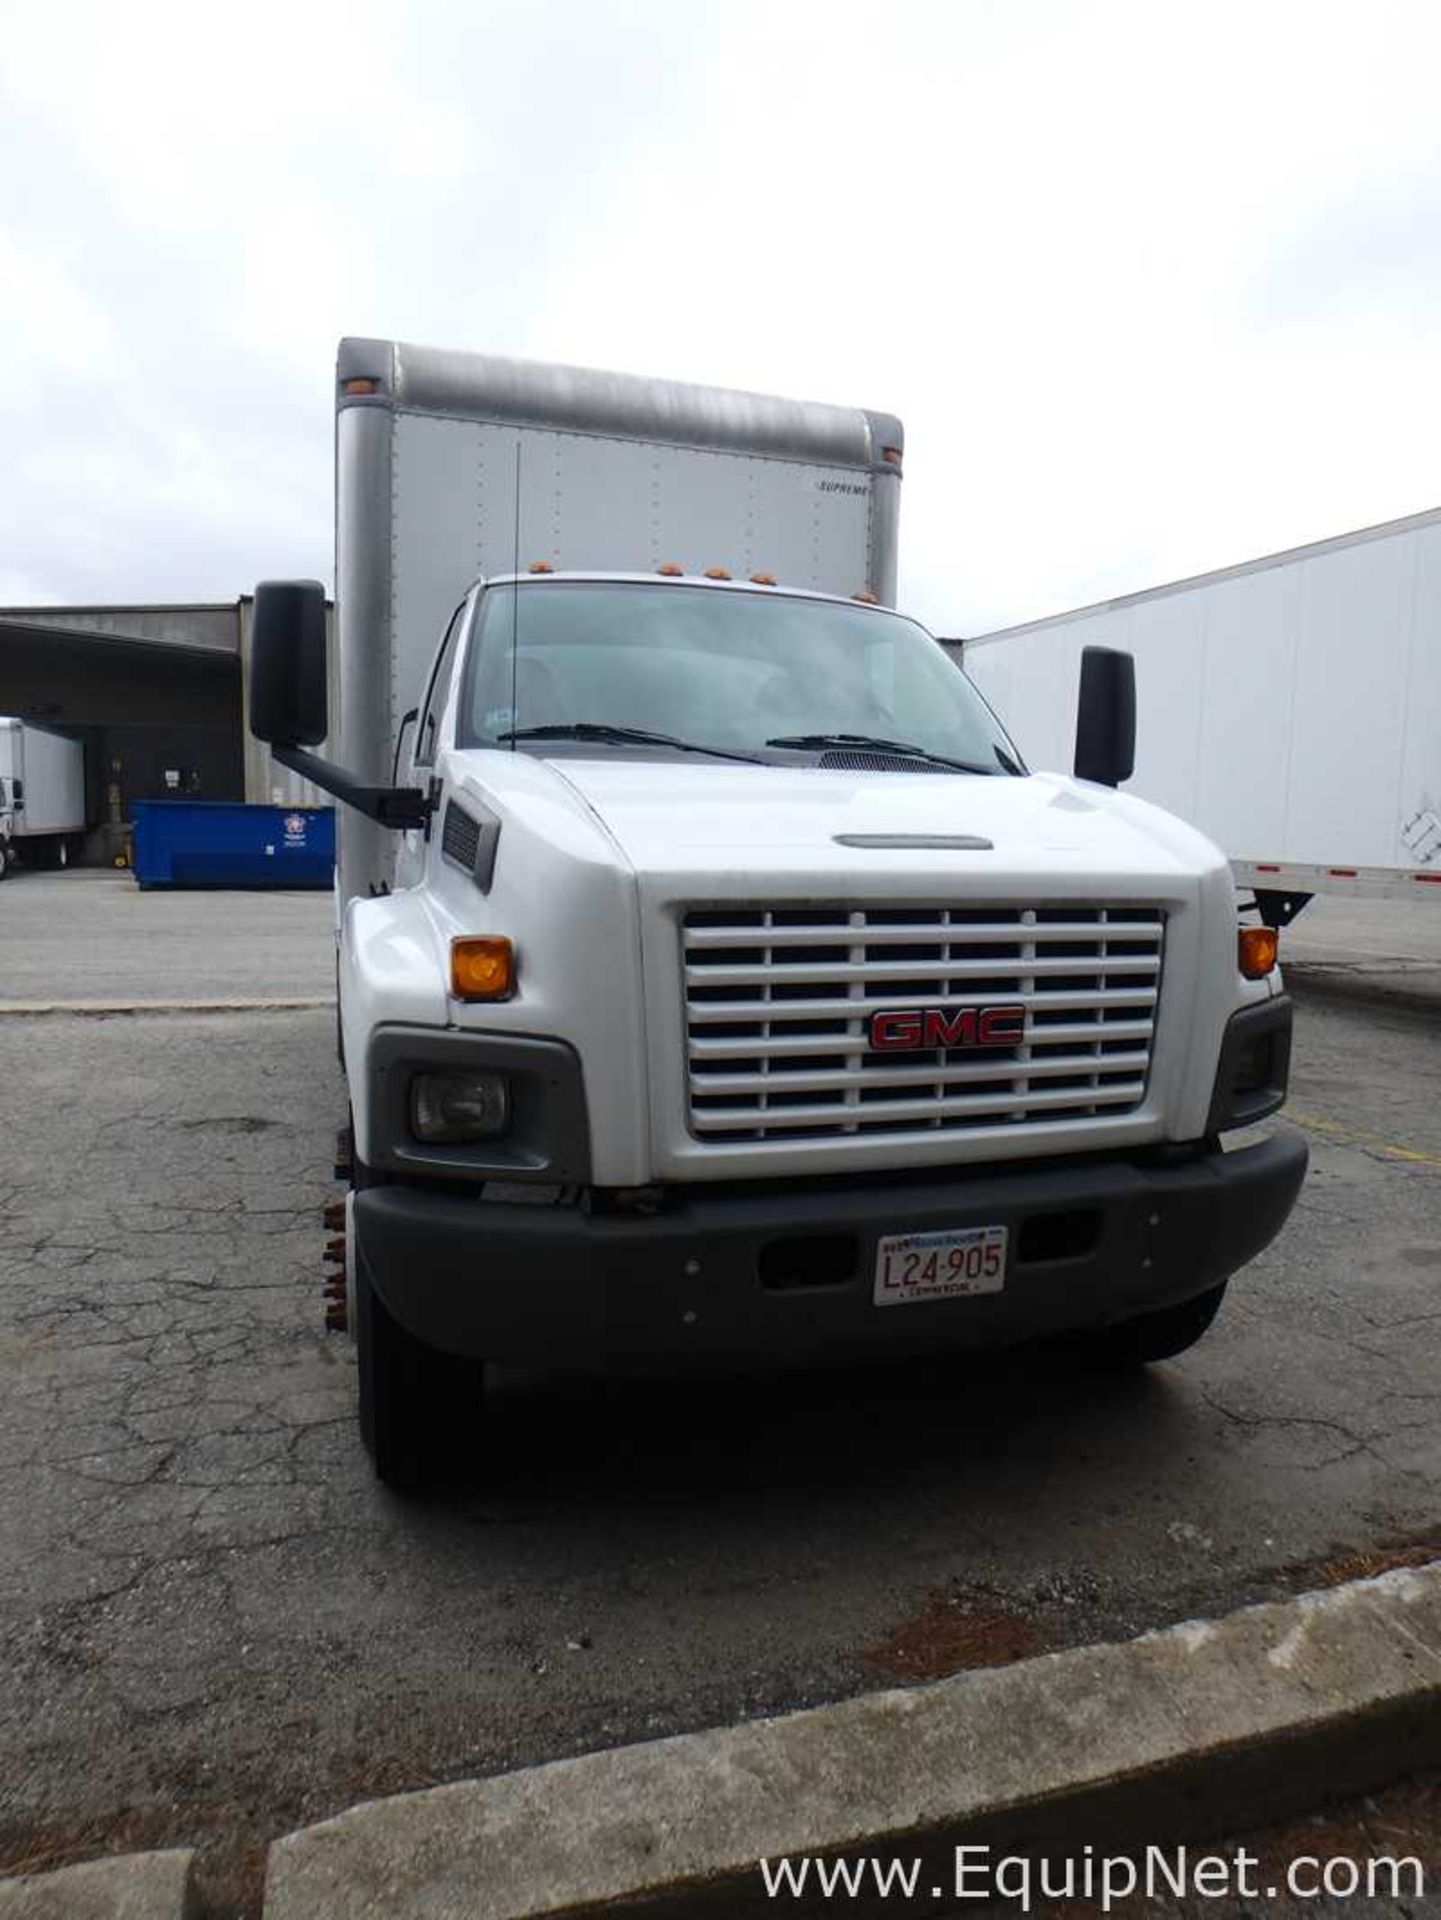 2005 GMC C7500 Box or Cargo Truck - Image 24 of 33